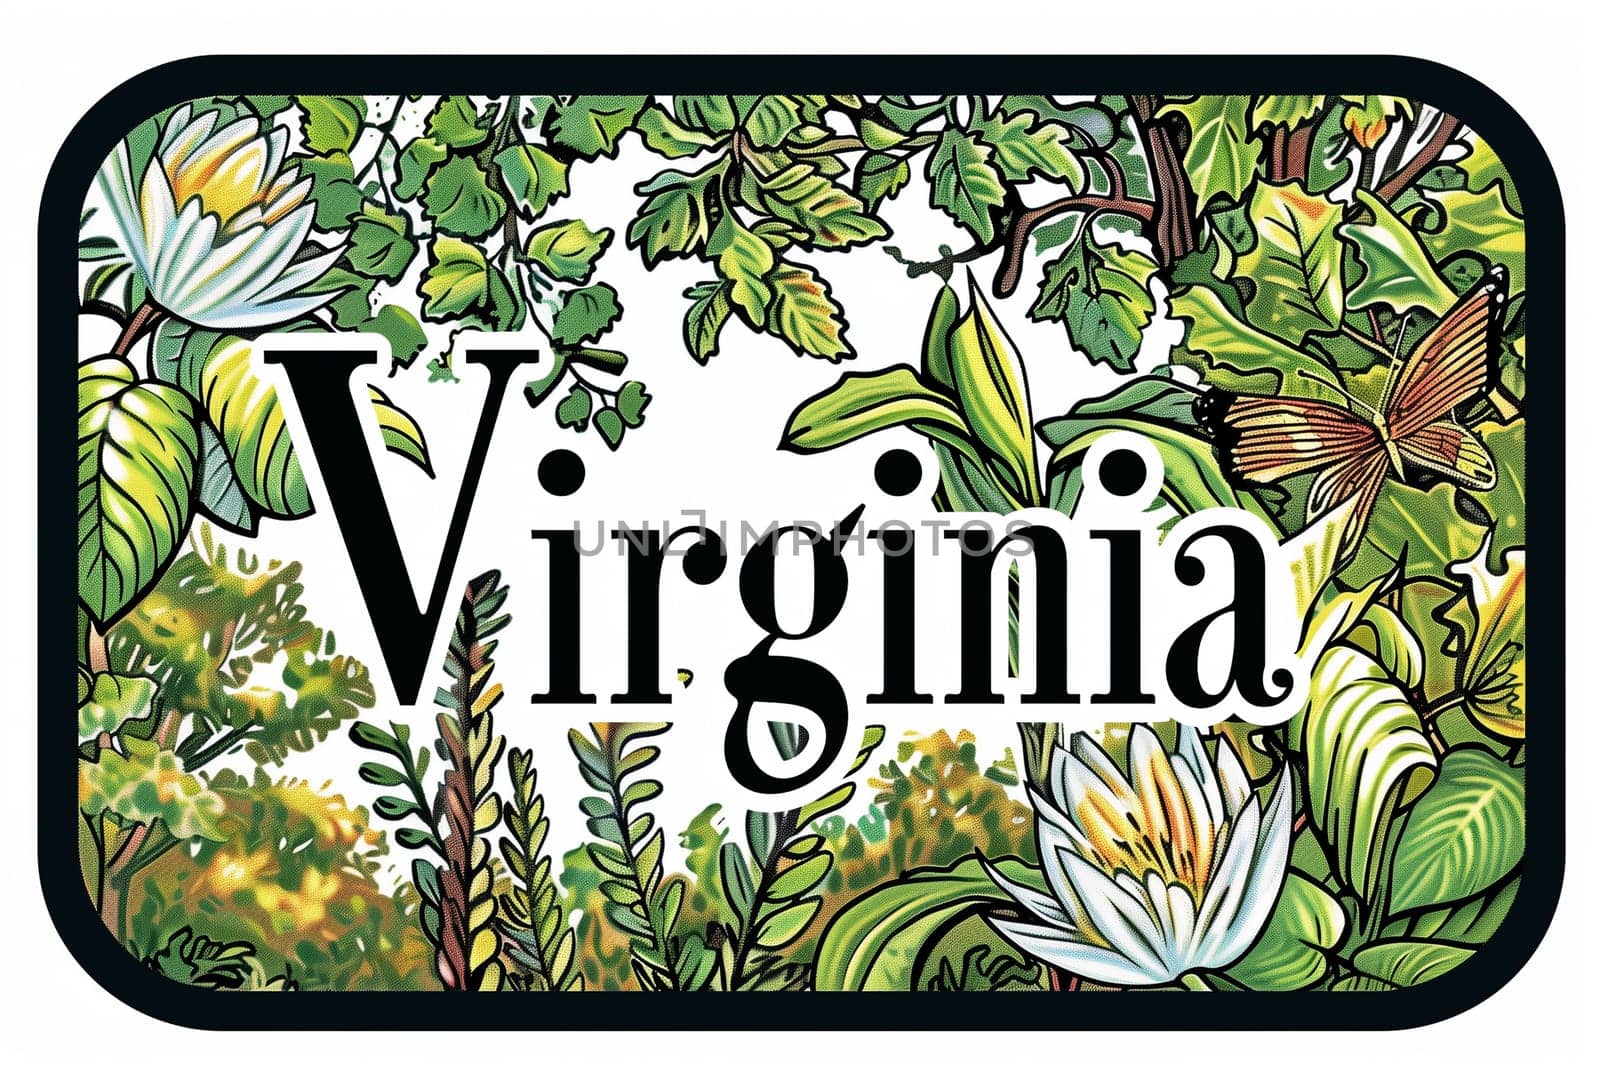 Virginia Sign Along the Road by Sd28DimoN_1976